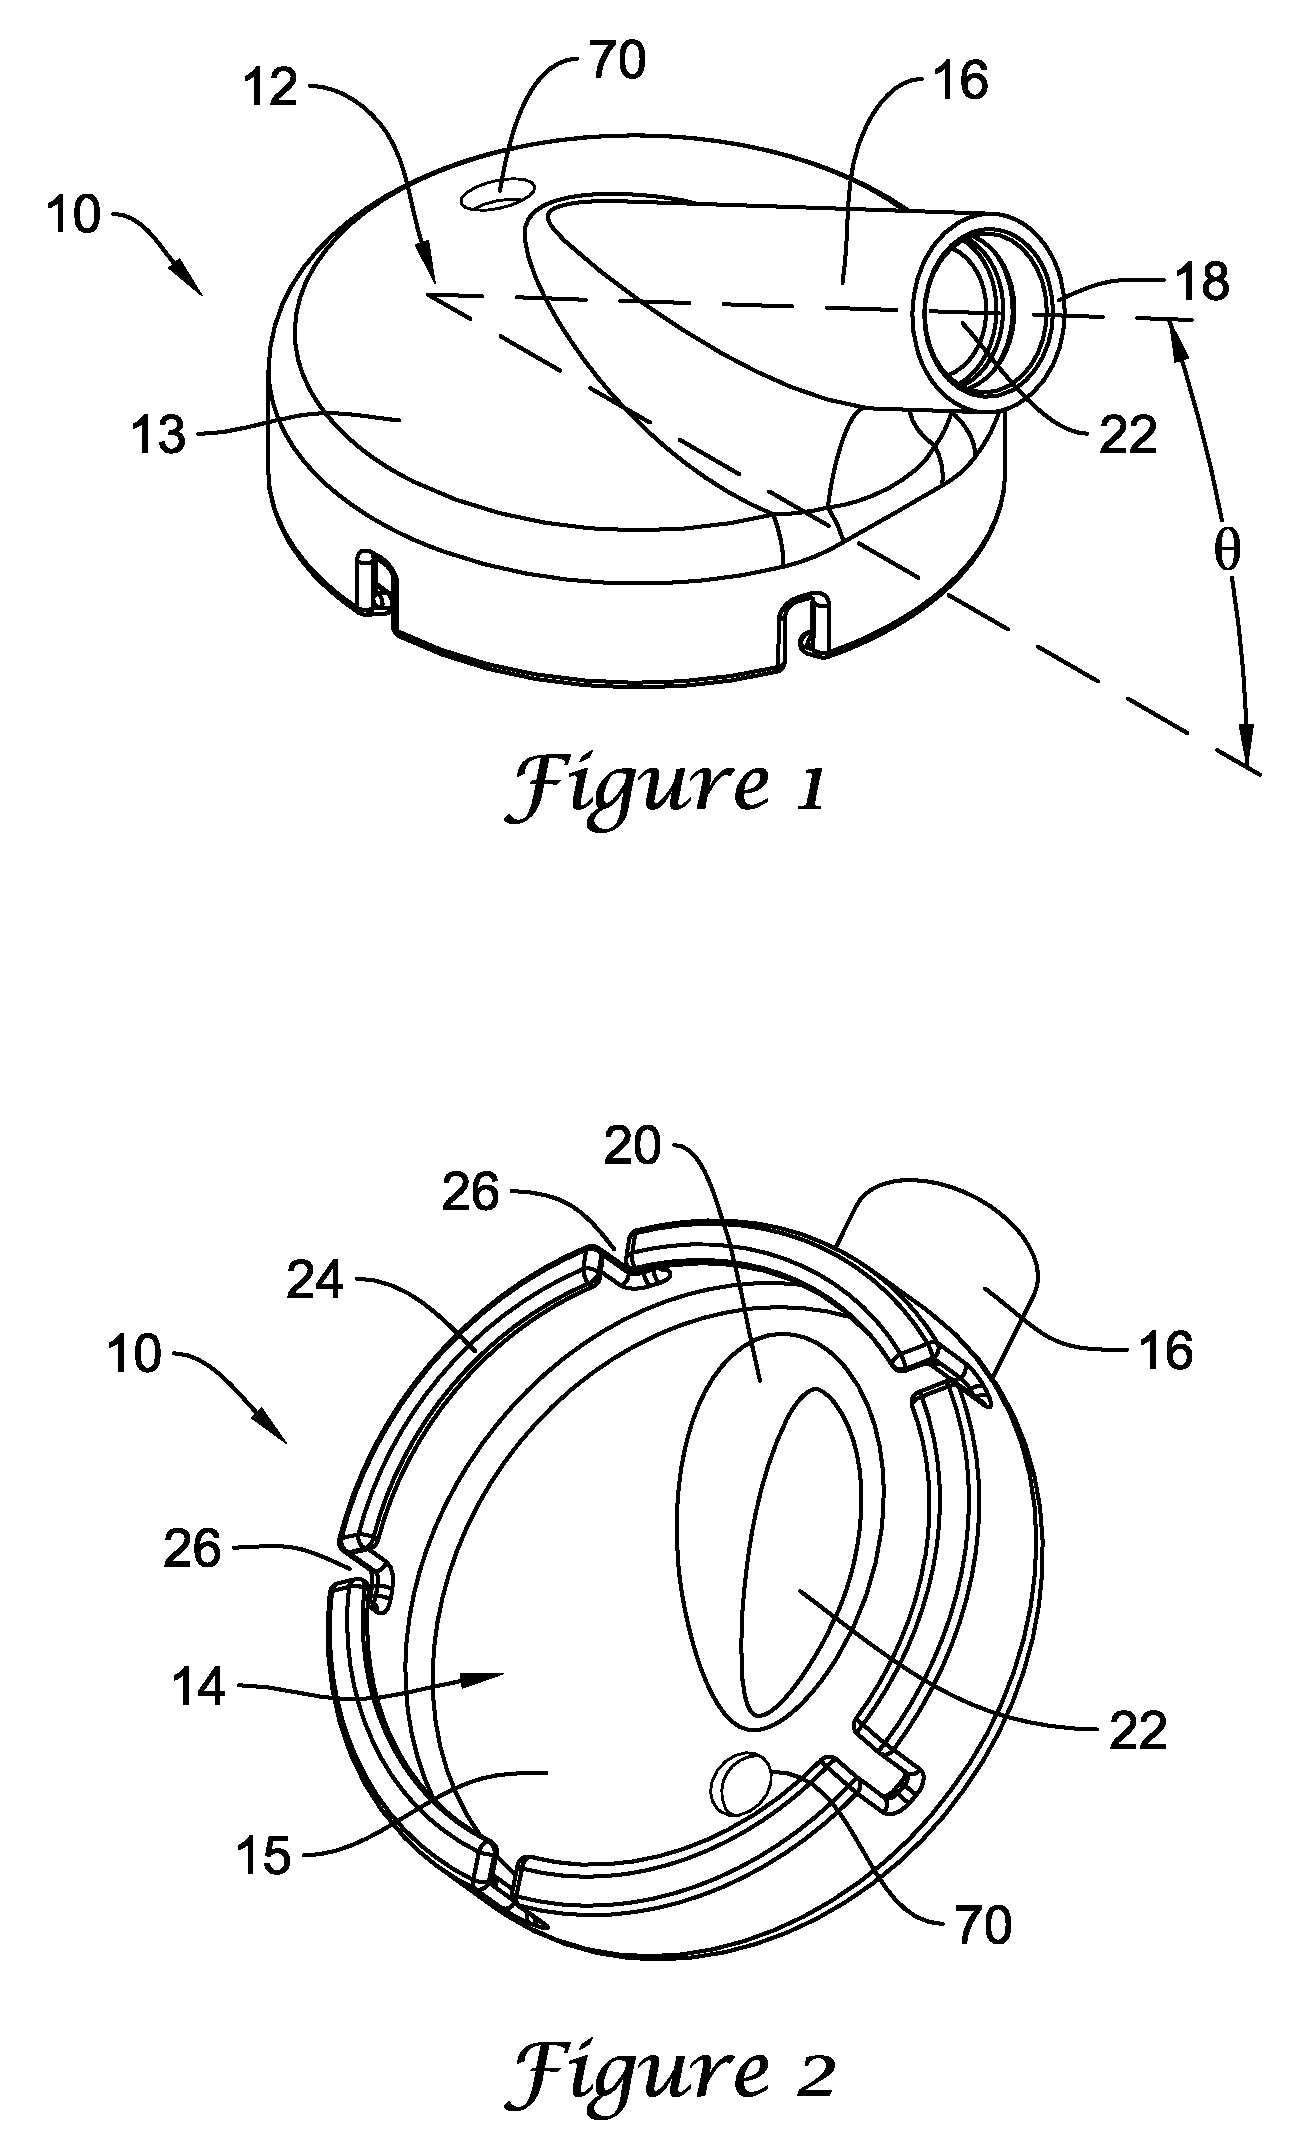 Earbud Adapter with Enhanced Frequency Response